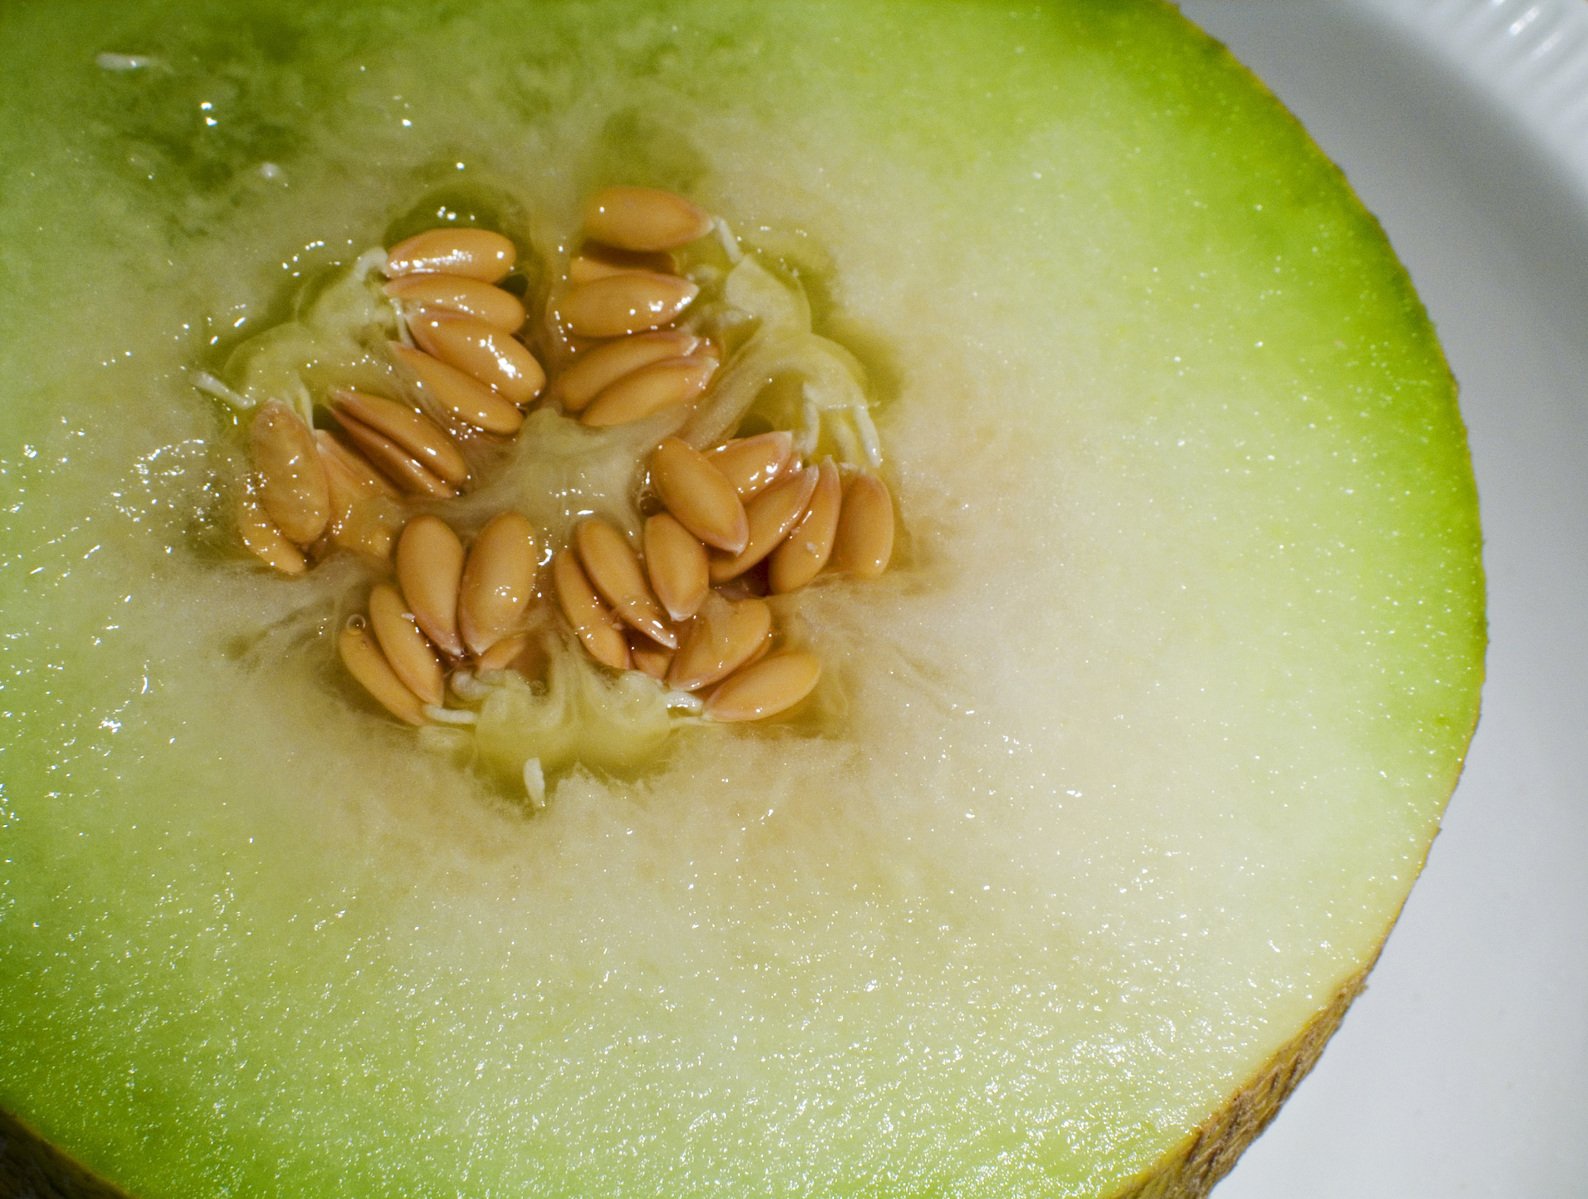 a piece of fruit is shown with peanuts inside of it